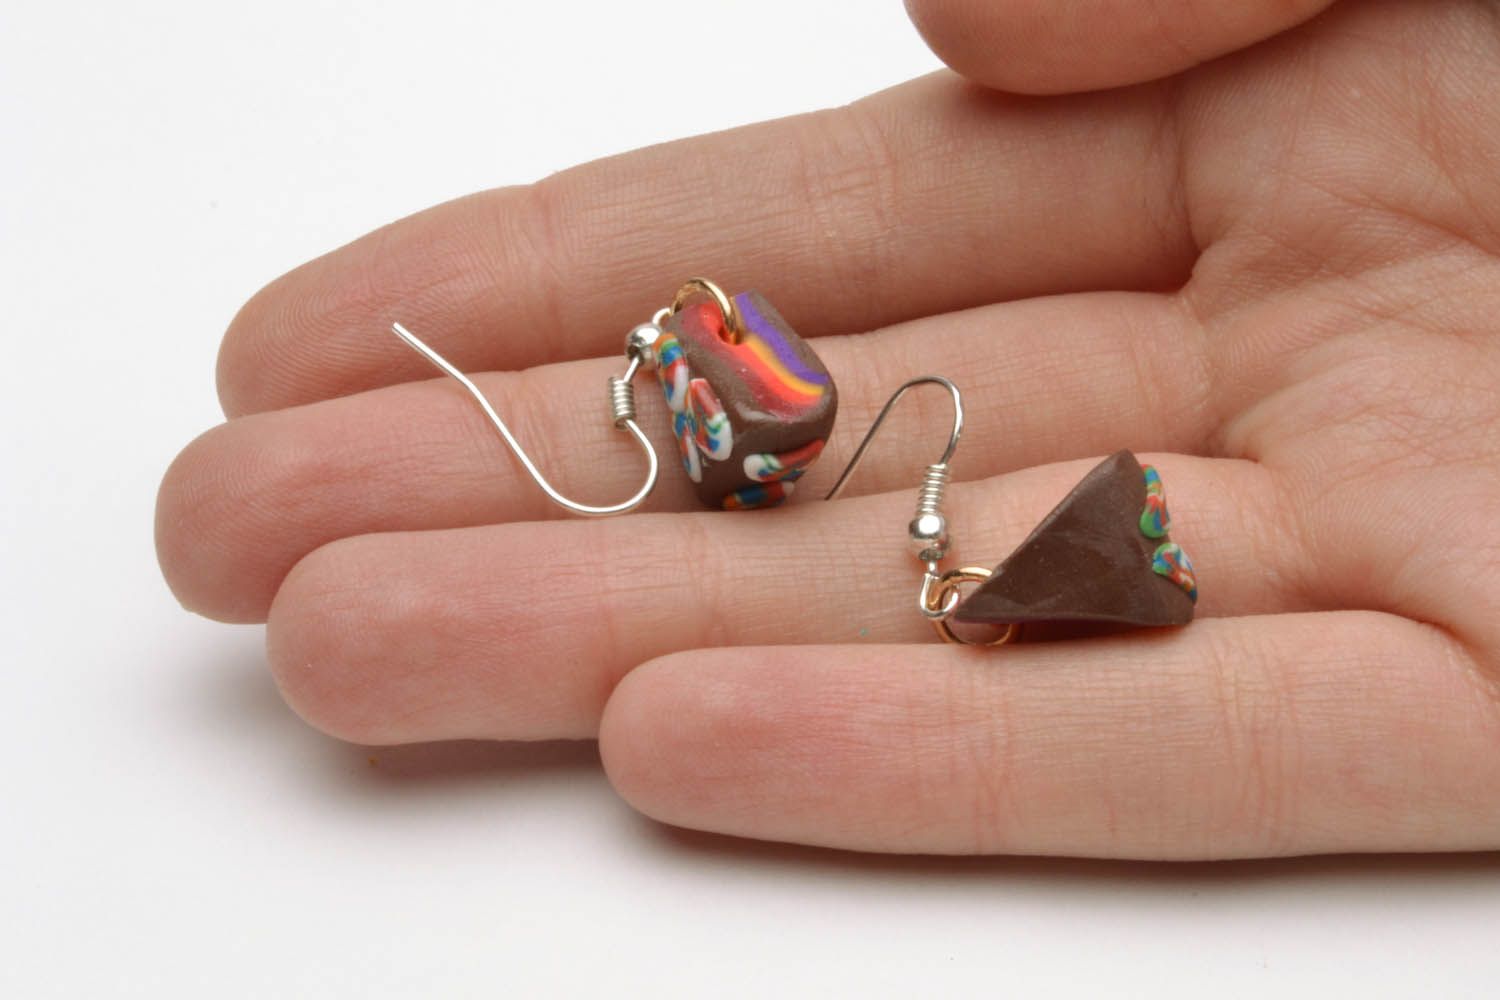 Cake-shaped earrings made of polymer clay photo 5